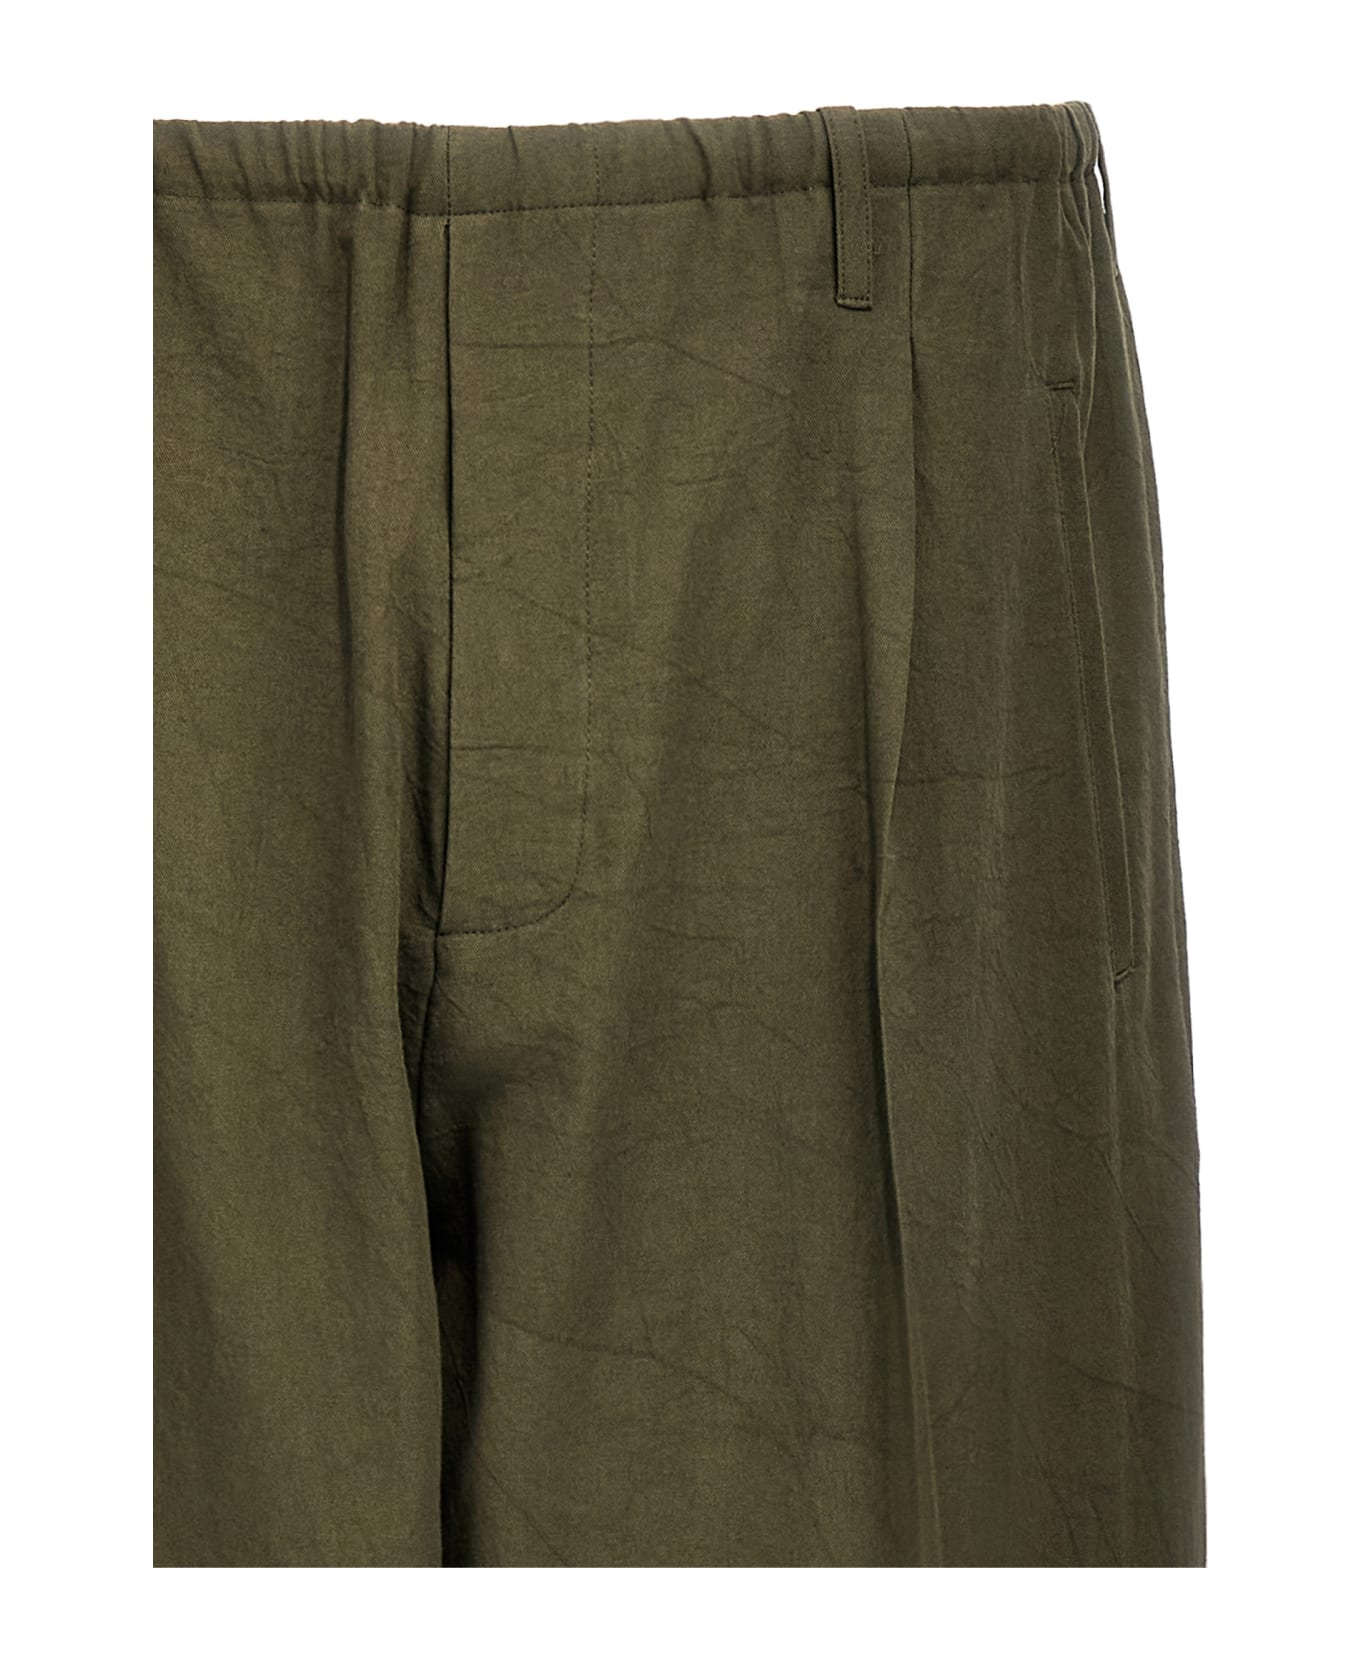 Magliano 'new People's' Pants - Green ボトムス